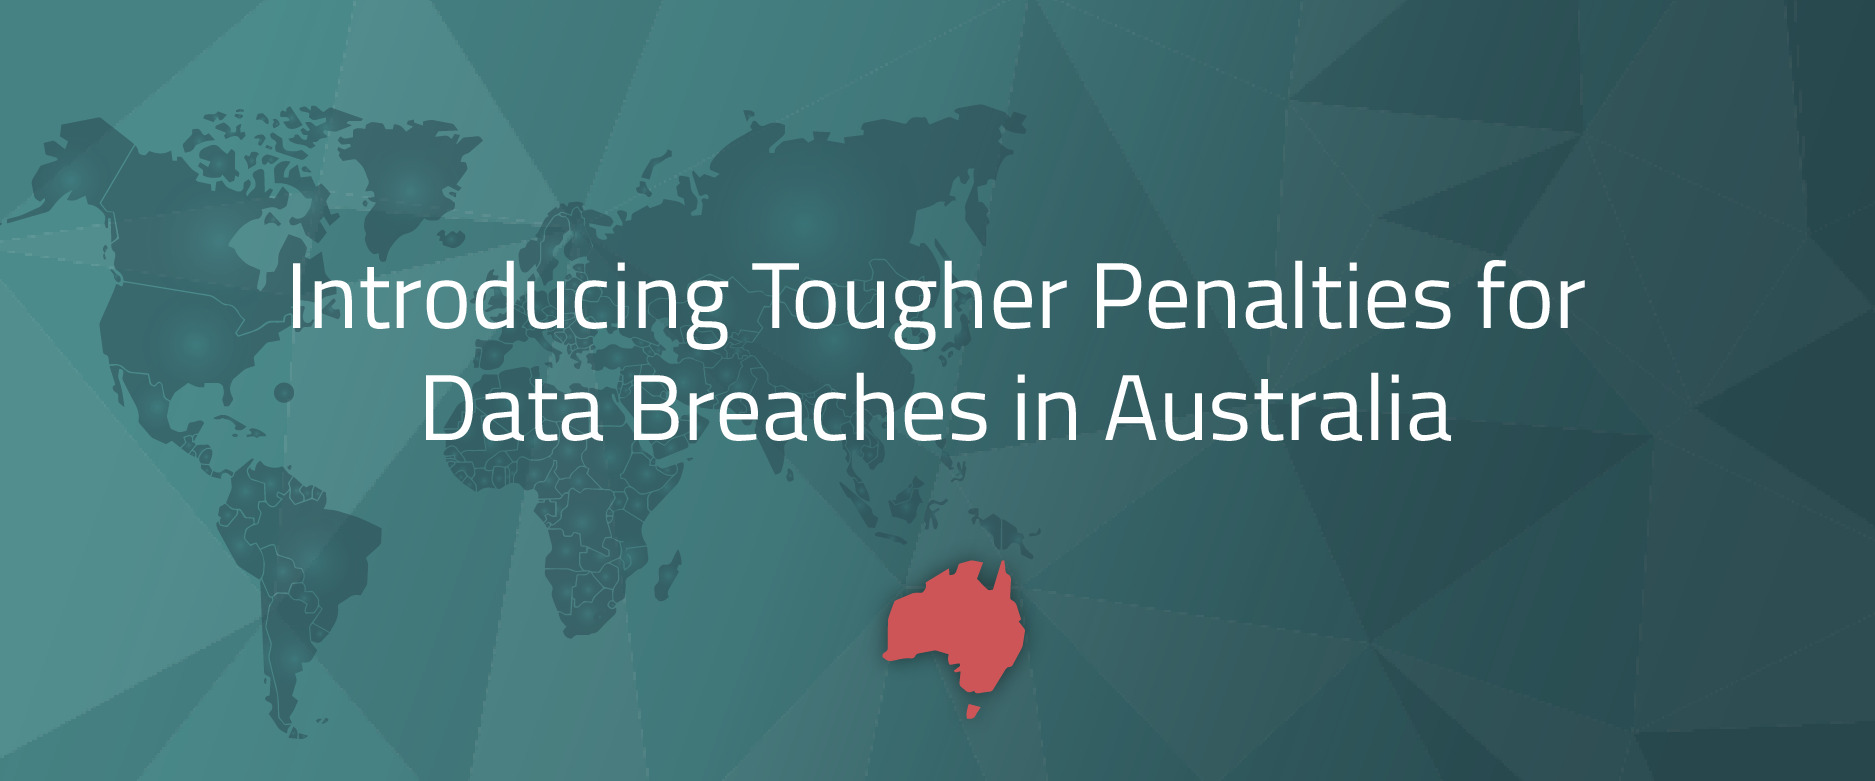 Introducing tougher penalties for data breaches in Australia